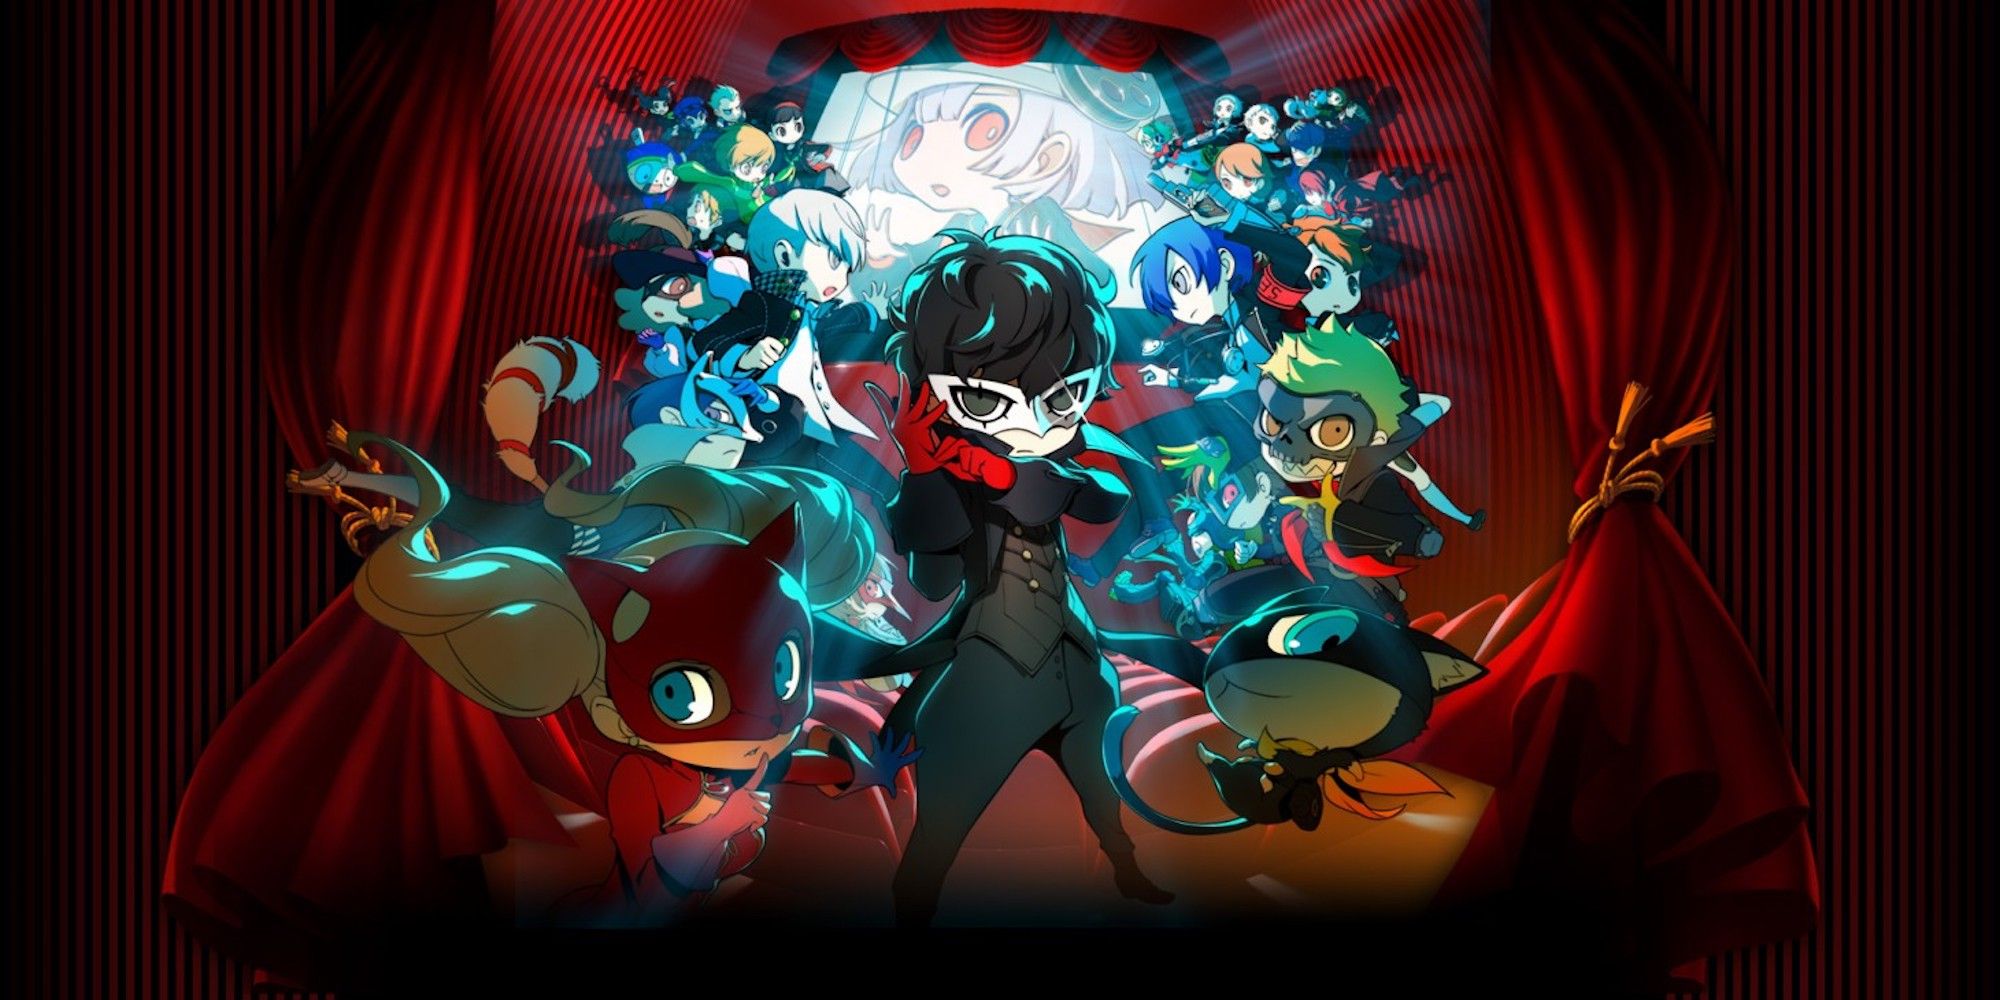 Promo art featuring characters in Persona Q2